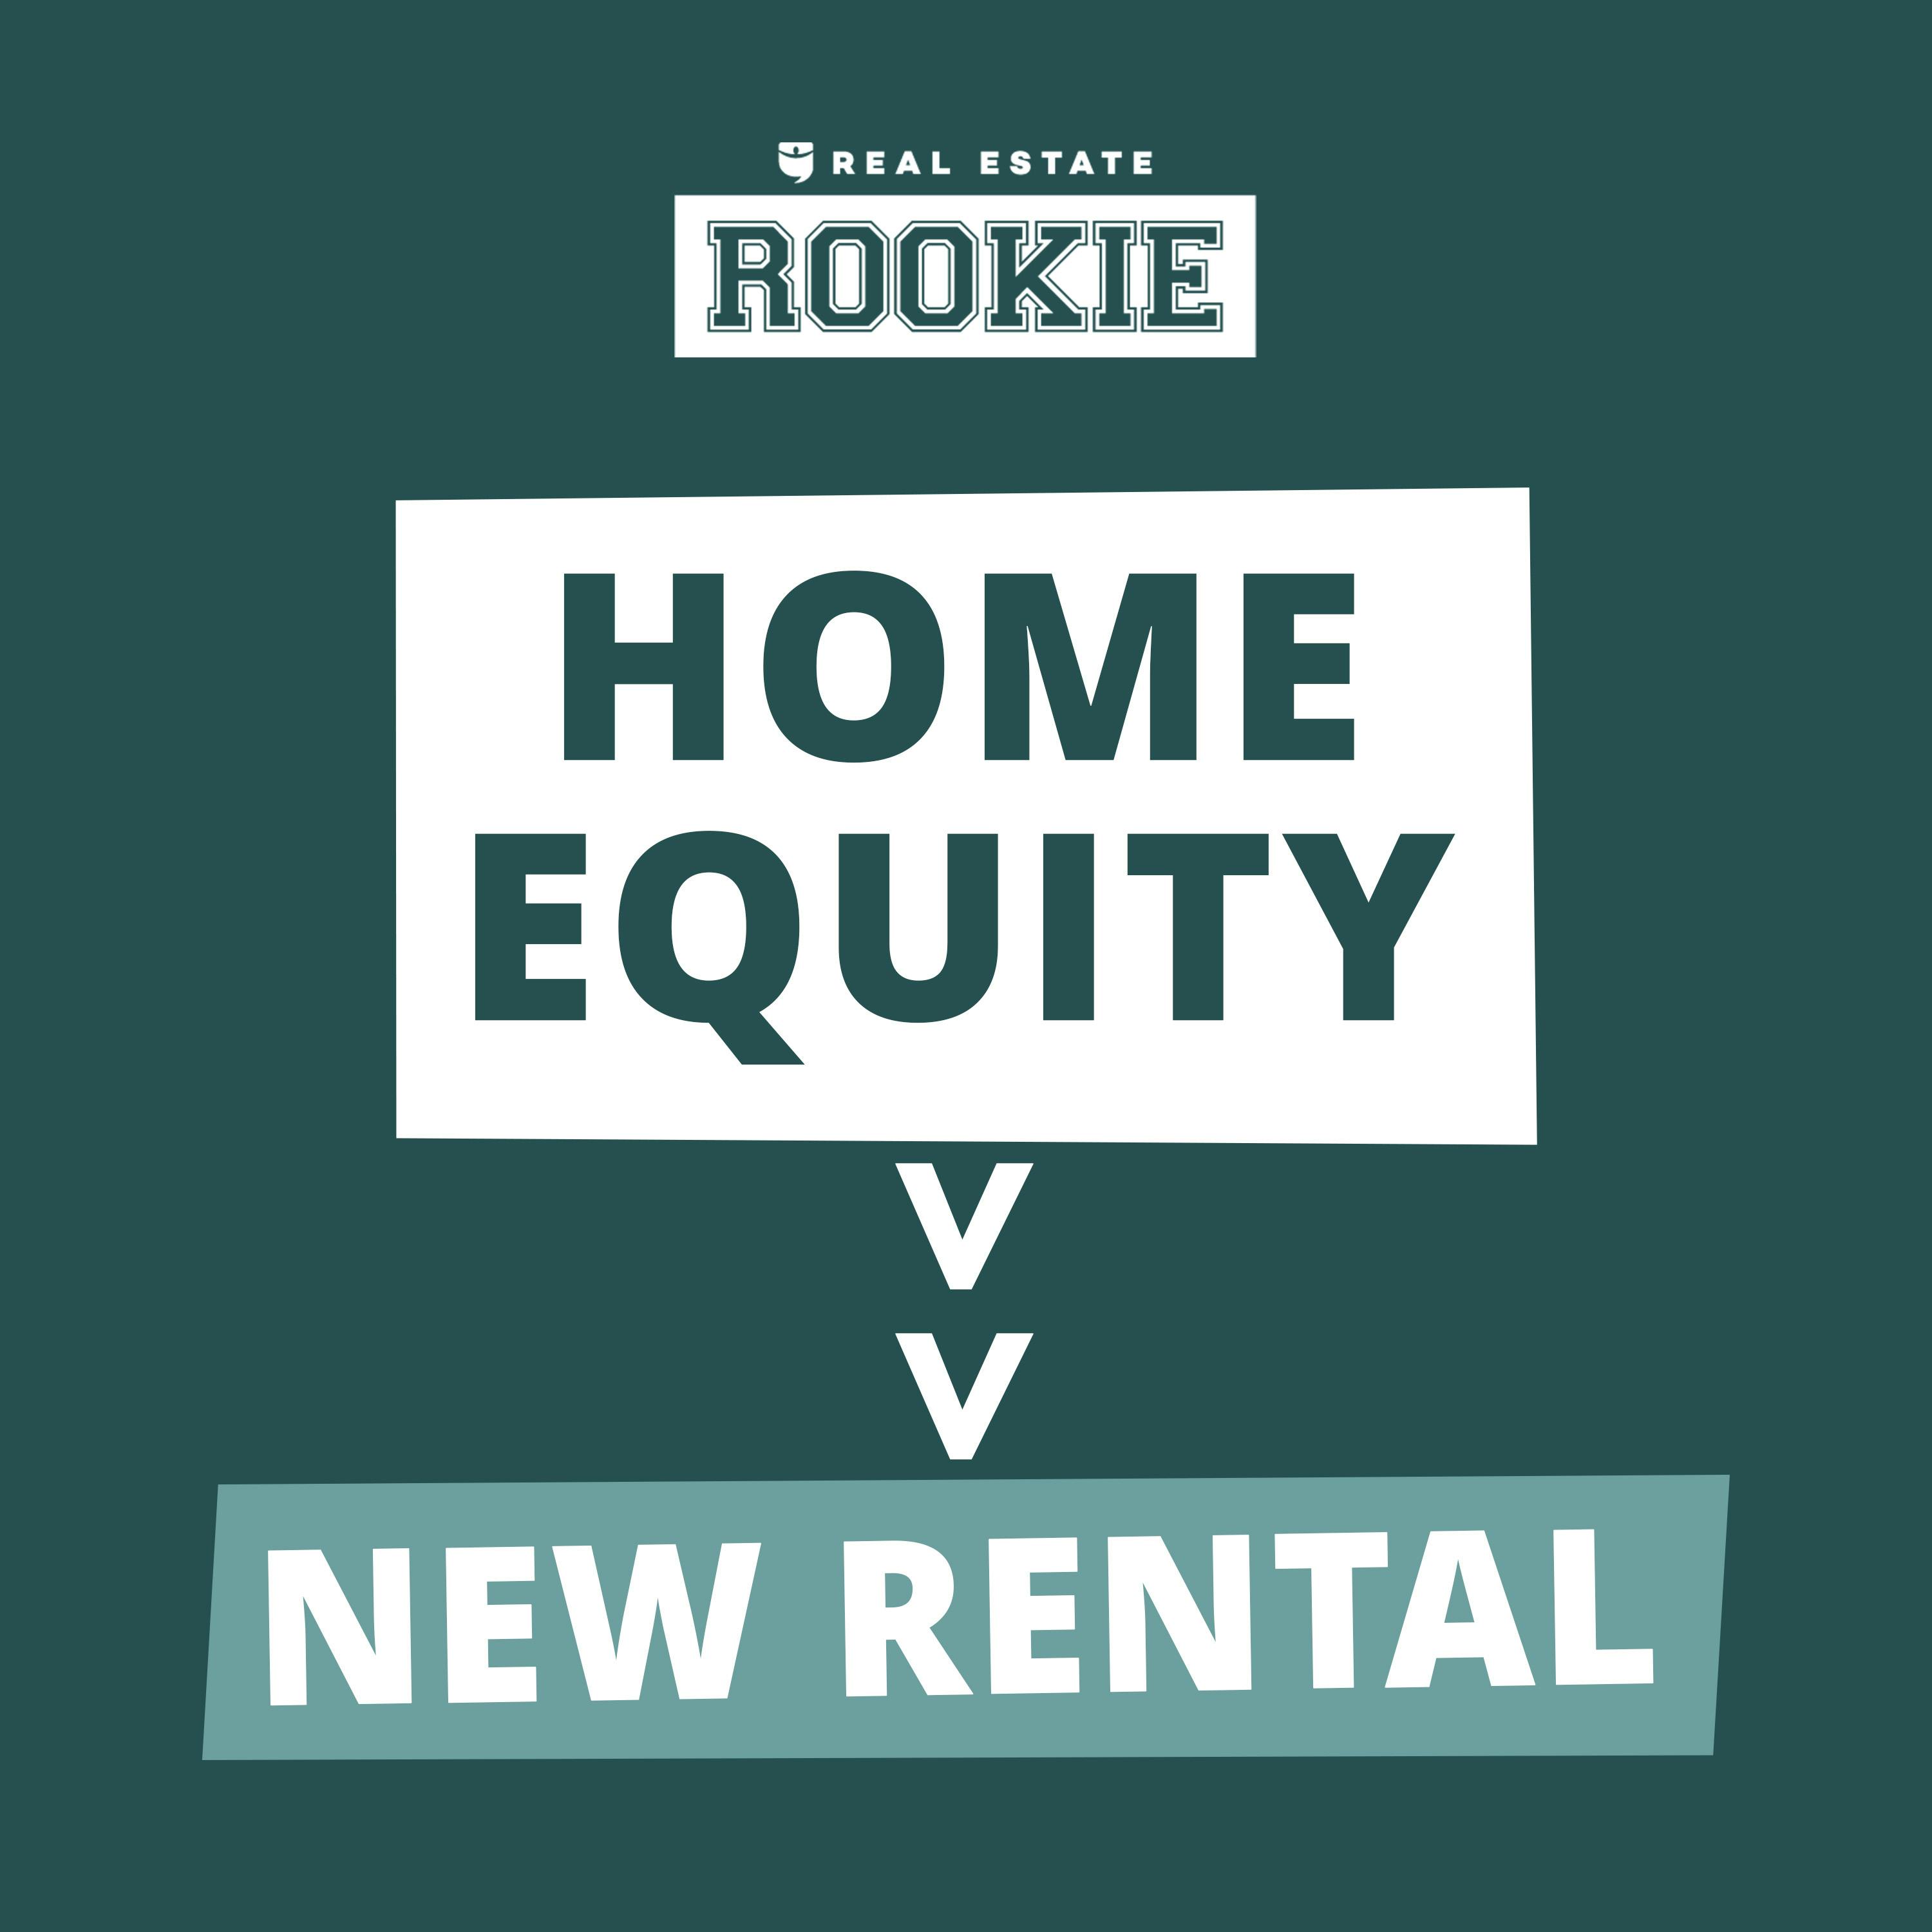 290: Rookie Reply: Best HVACs, HELOCs, and Using Home Equity to Buy Rentals